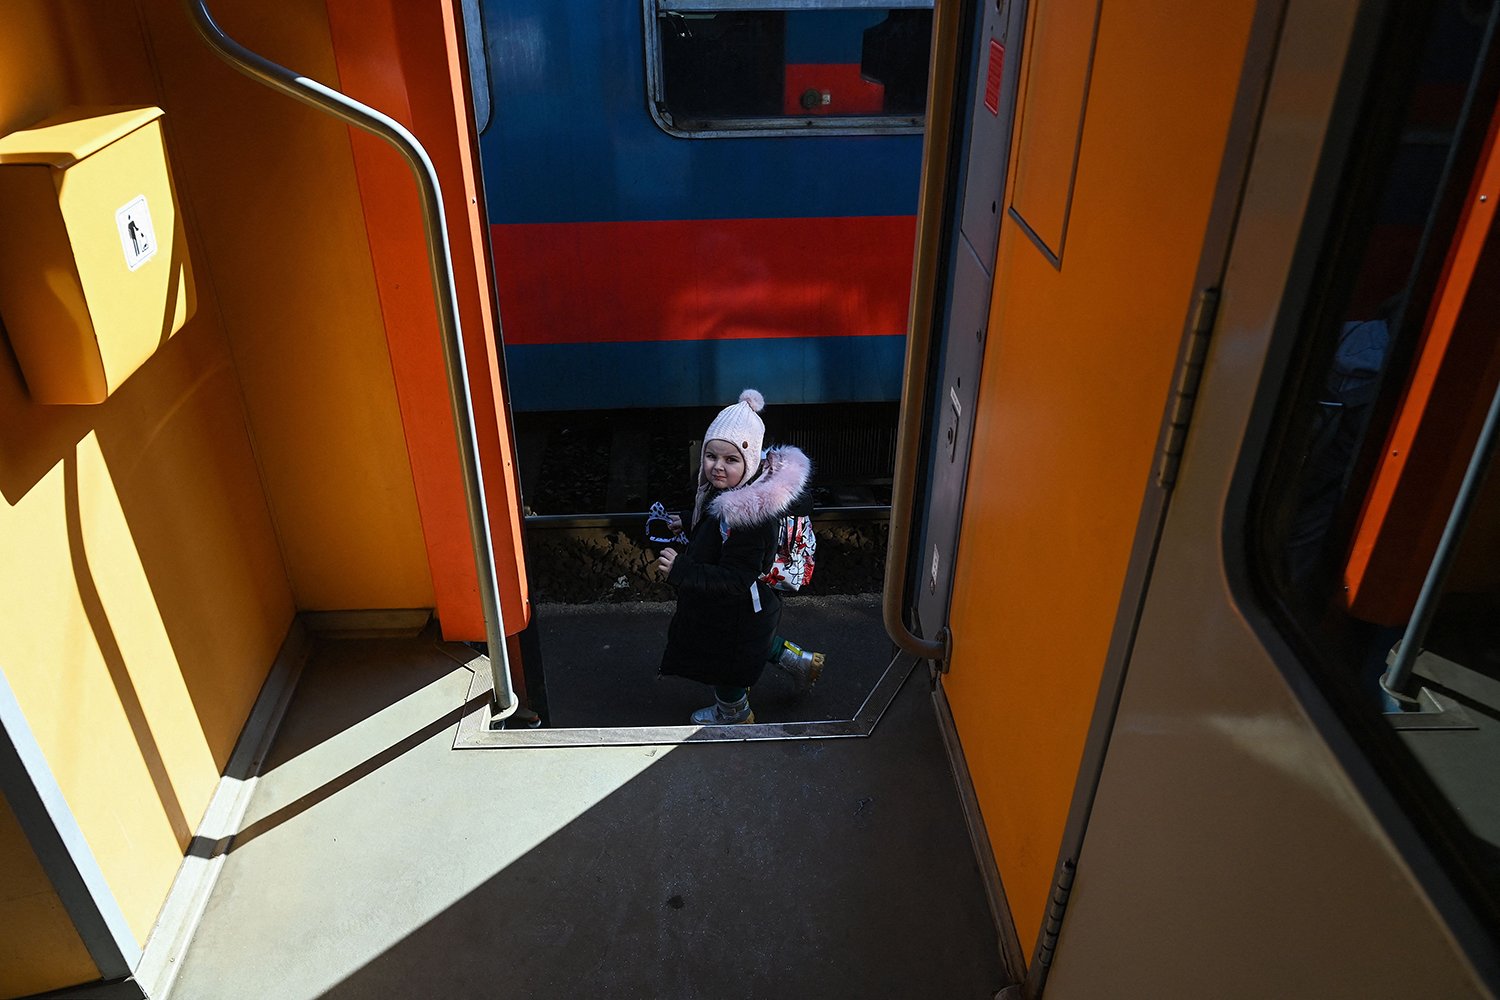 A child, dressed in a white hat and a long black winter coat, walks past the entrance to a train with orange interior walls in the Hungarian-Ukrainian border town of Zahony.